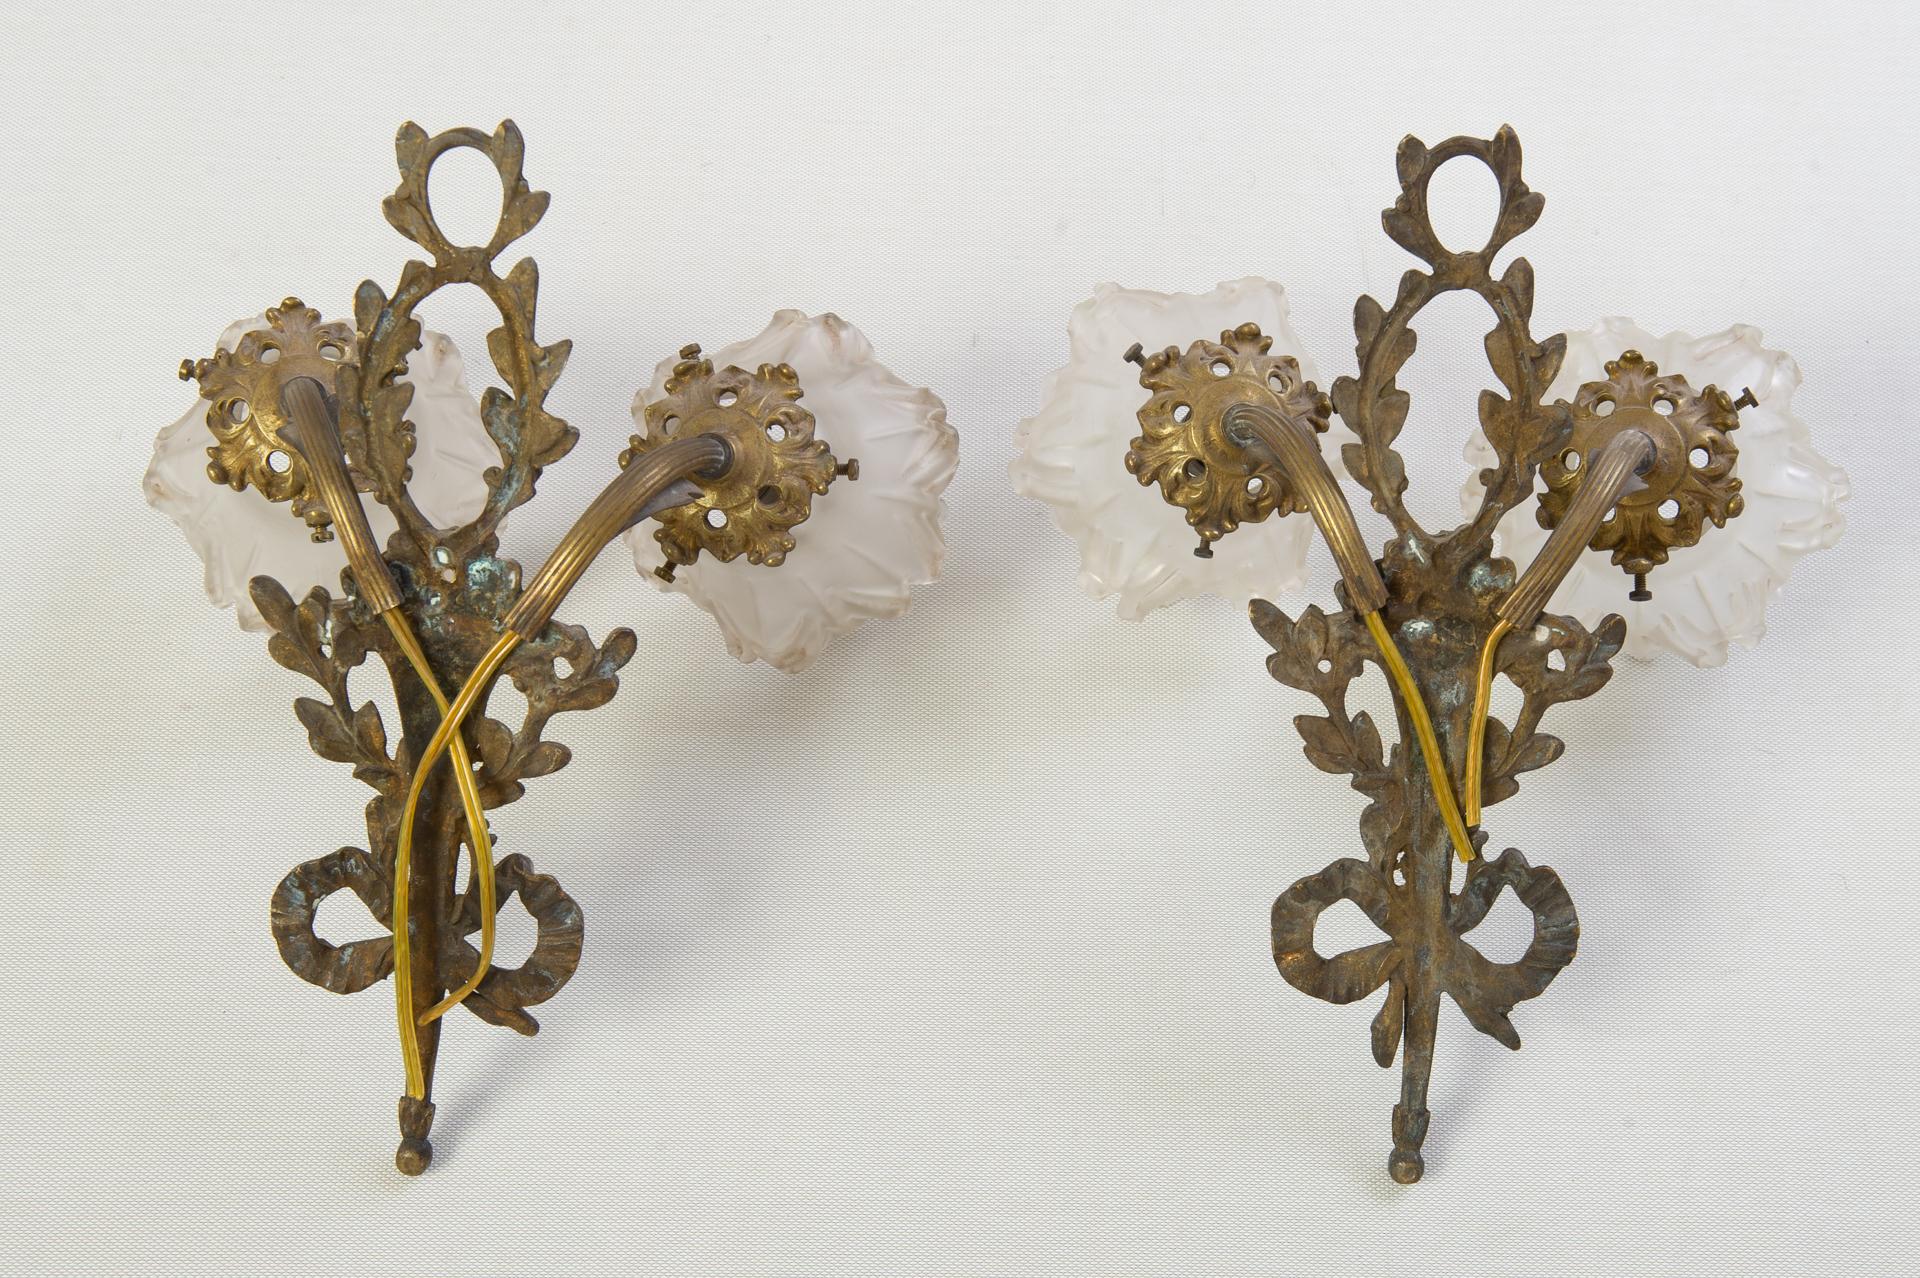 O/3746 - Antique French pair of sconces in massive bronze, with the original glasses (rare !).   They are so special!
And the price is good because I would like to close my business (due to age).
For shipping I would make a wooden case for about 120